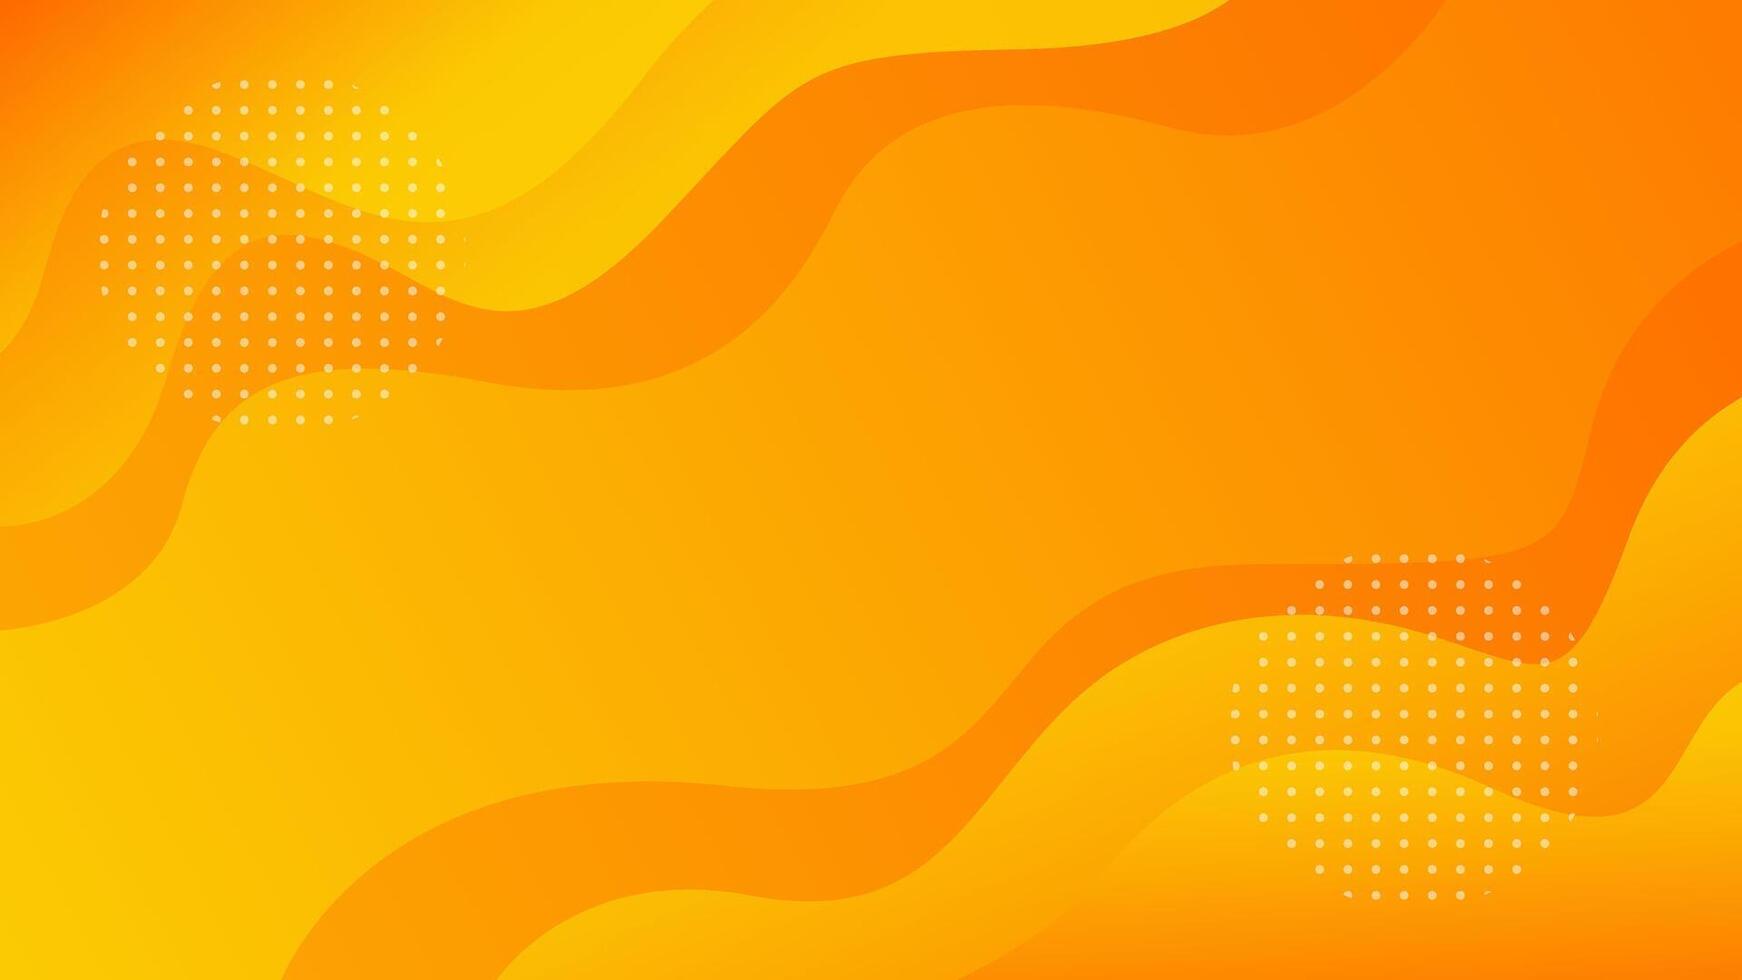 Abstract Flat Dynamic Orange and Yellow Fluid Shapes Background vector